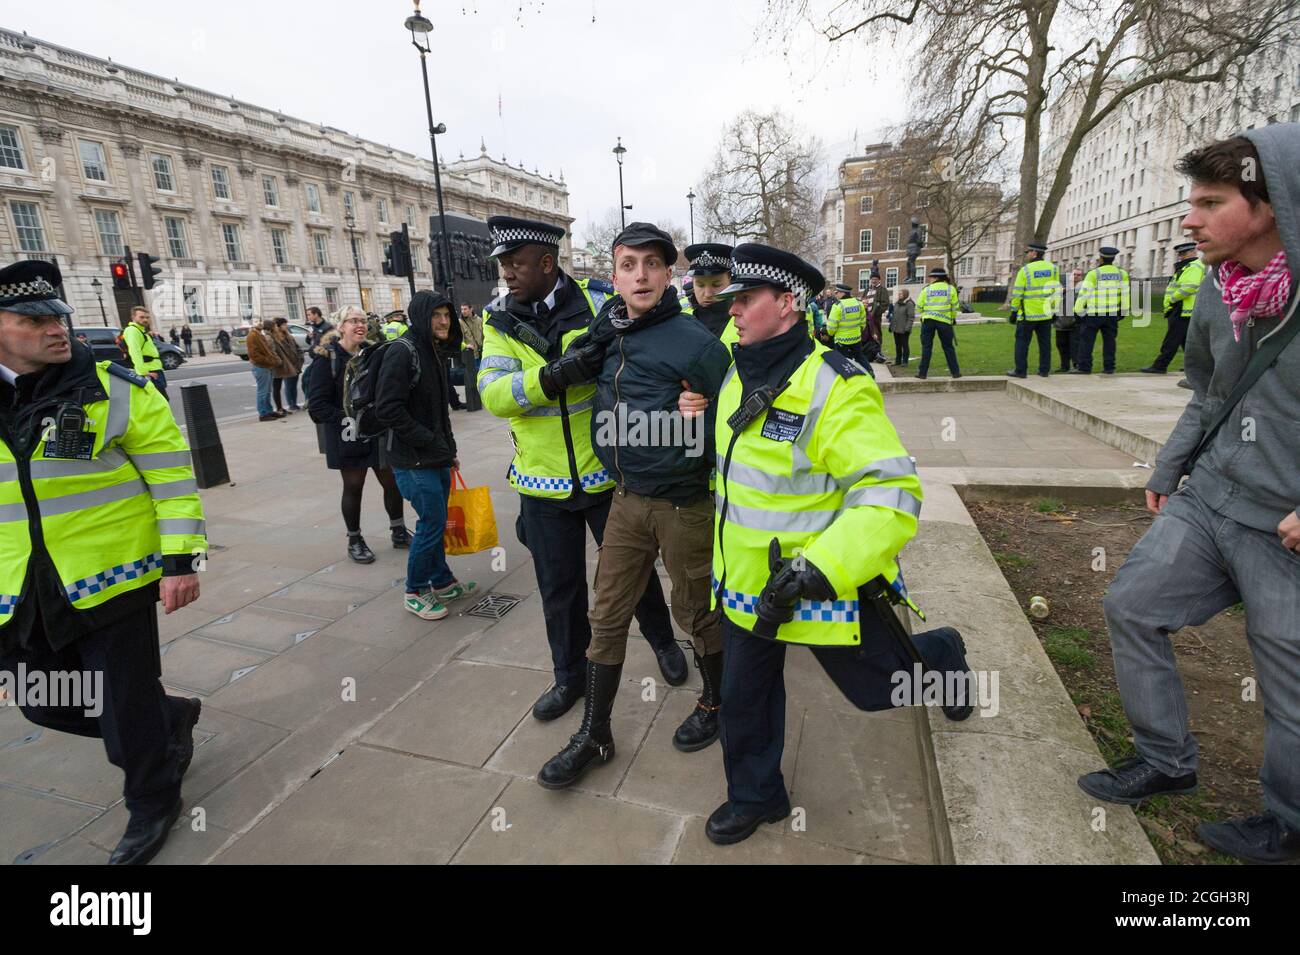 Anti fascist protester tbeing arrested by the police during a protest against first rally of the newly formed UK Branch of Pegida (Patriotic Europeans Against the Islamisation of the West). The Pegida rally was to protest against what they say is Islamisation of Britain. Less than100 people came out to support Pegida rally they where heavily out numbered by an anti Pegida protesters. Pegida started in Dresden Germany in October 2014, Patriotic Europeans Against the Islamisation of the Occident (German: Patriotische Europäer gegen die Islamisierung des Abendlandes), abbreviated Pegida, is a pan Stock Photo